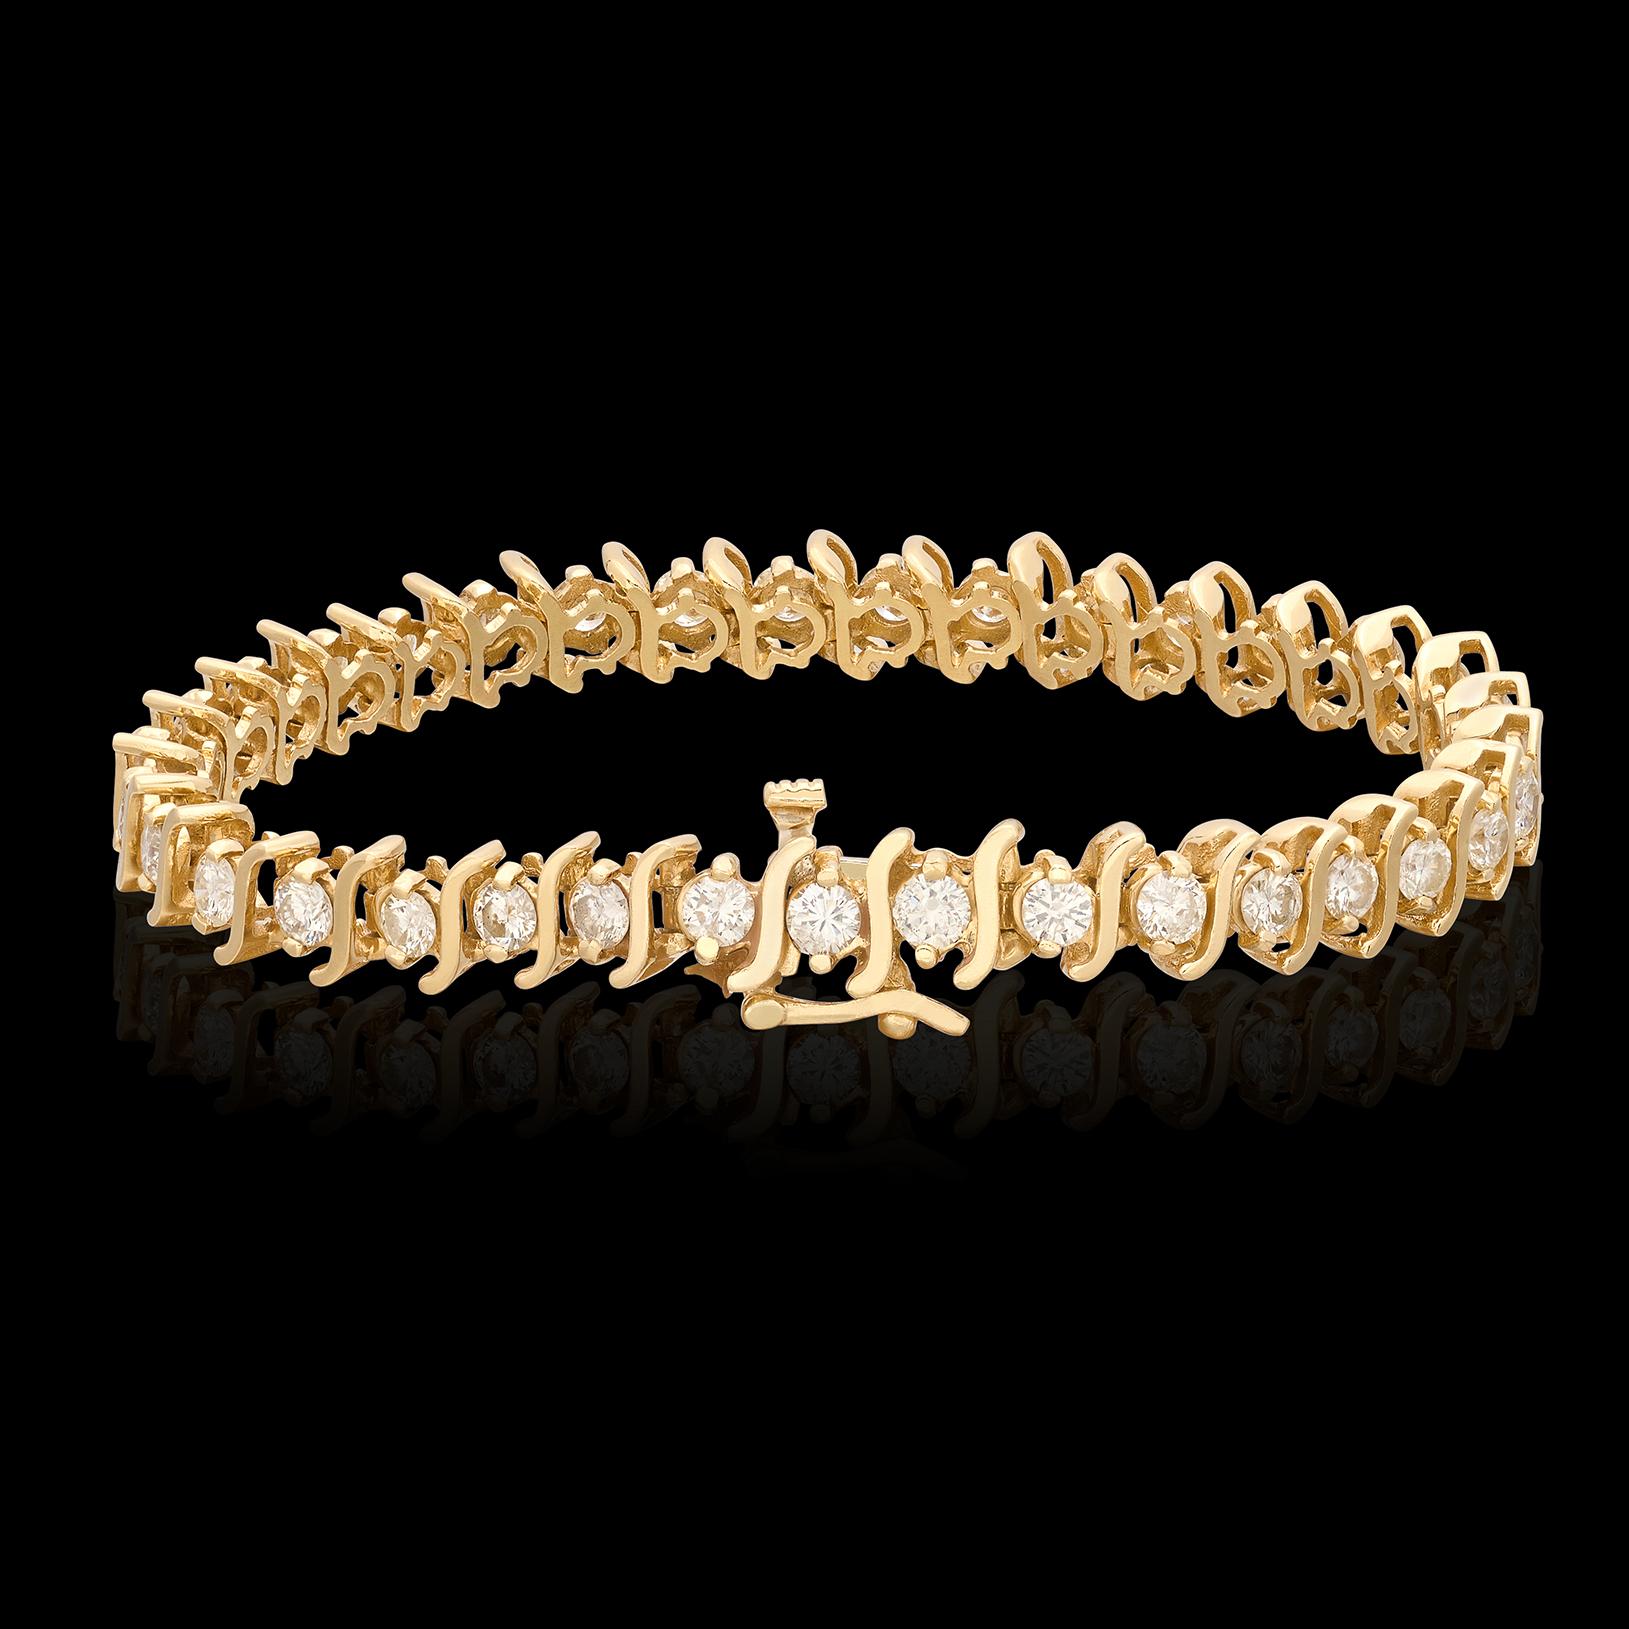 As stylish now as it was in the 1970's when this design first appeared. This yellow gold diamond tennis bracelet features 35 incredibly well-matched fine white diamonds for 3.85 carats total weight. The diamonds average G color and VS clarity, and